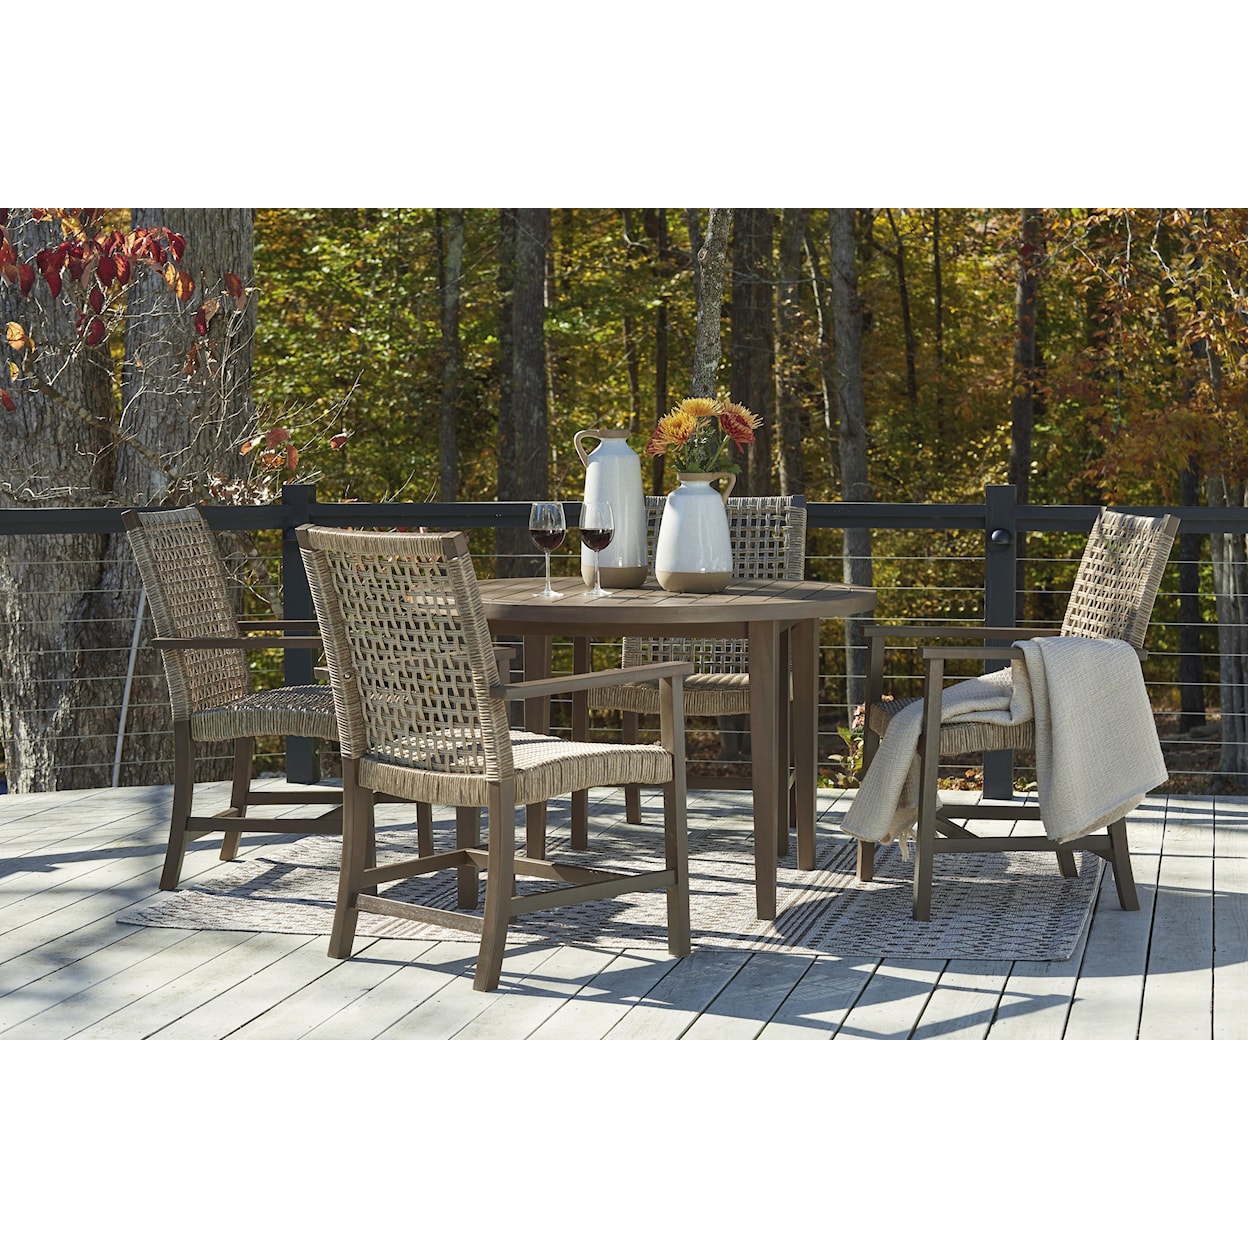 Ashley Germalia Outdoor Dining Table and 4 Chairs